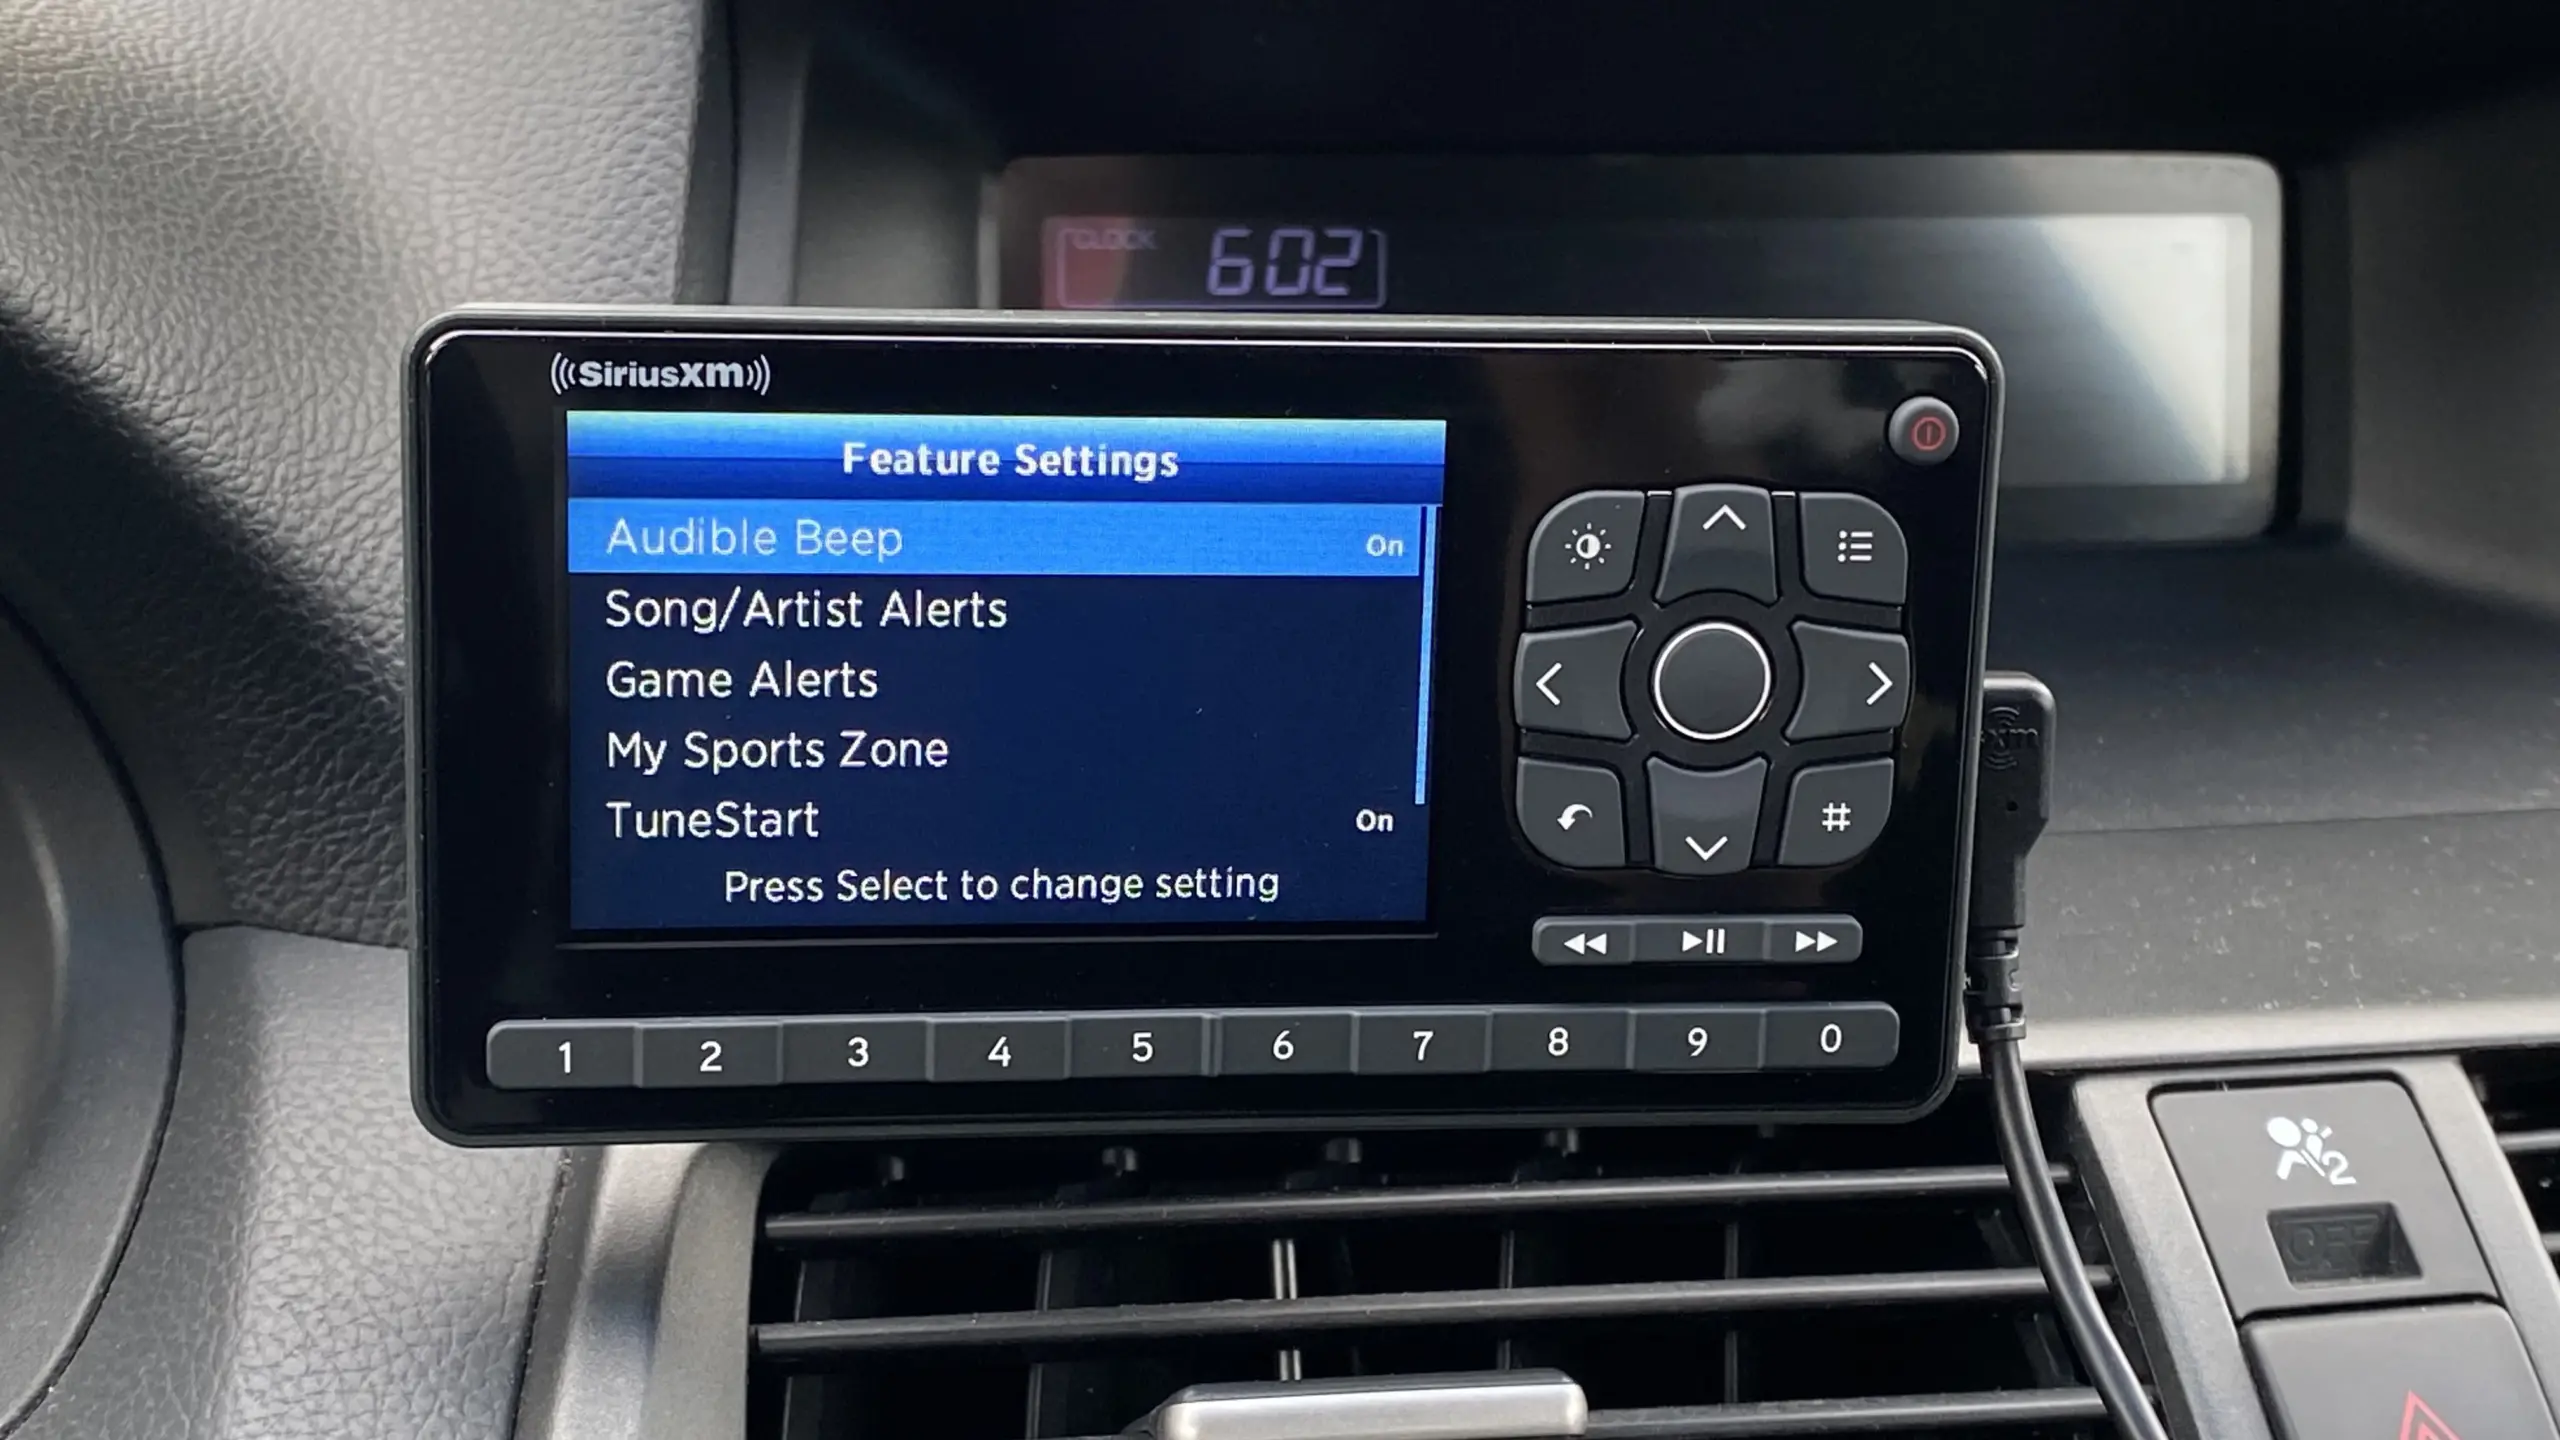 SiriusXM Roady BT feature settings and options to customize your device for a more personalized experience.